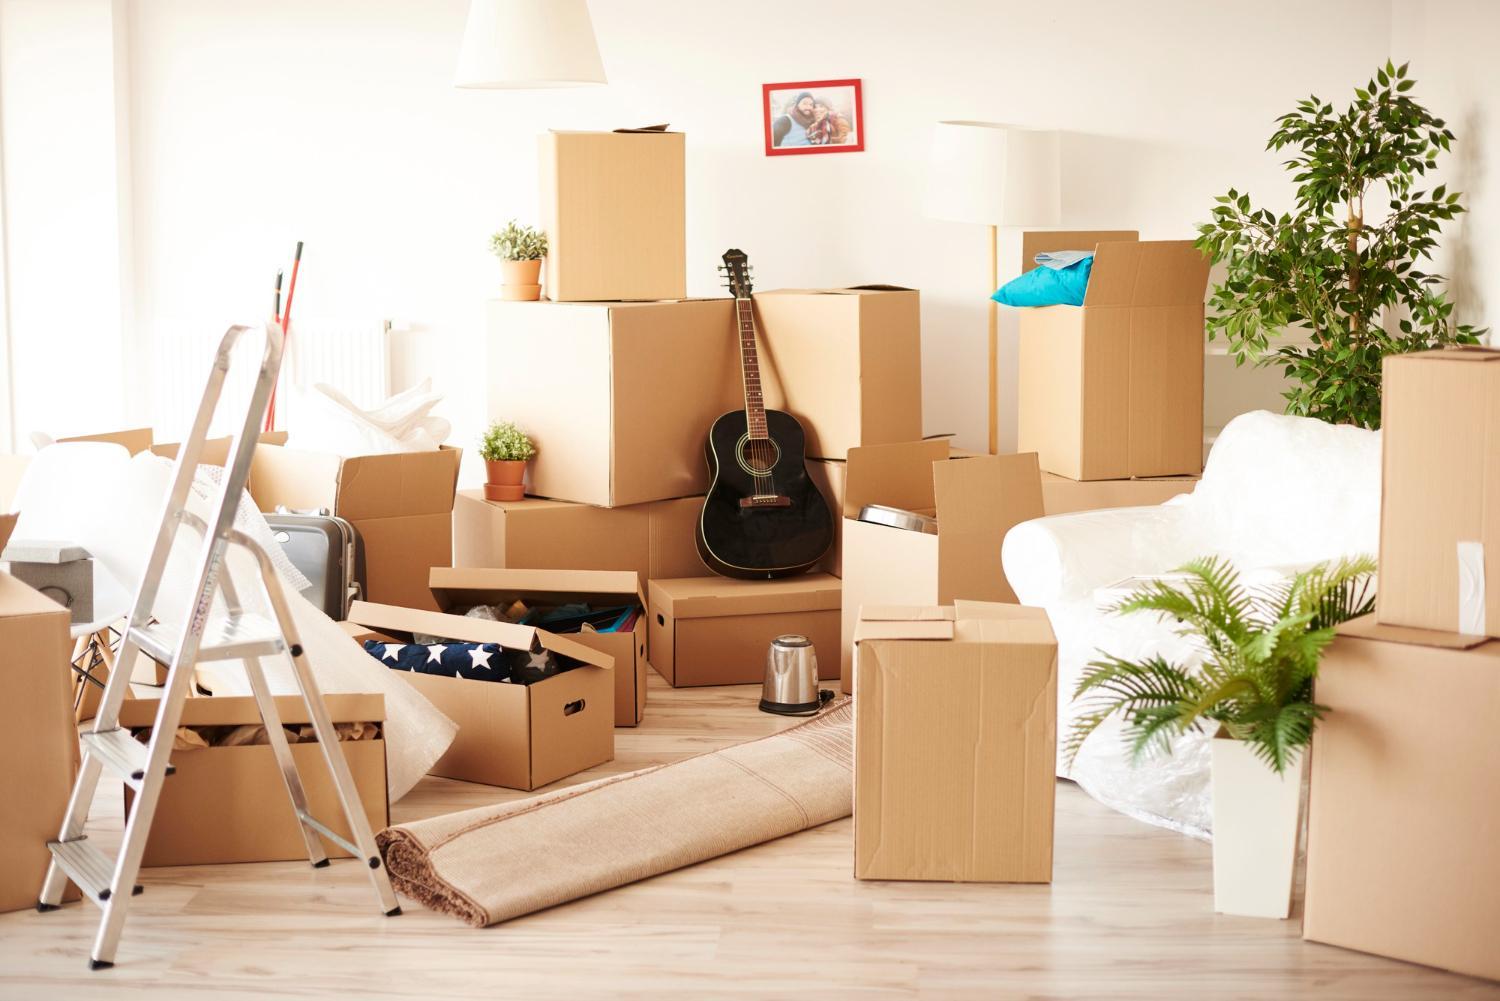 6 Things to Know About Moving Long-Distance | 2NuaqH8qcgXyWou6QxNervaOKMR3 hkQN Kl1lR orsYbo6IAje5OlqcmBRZ0UAfxETB7t